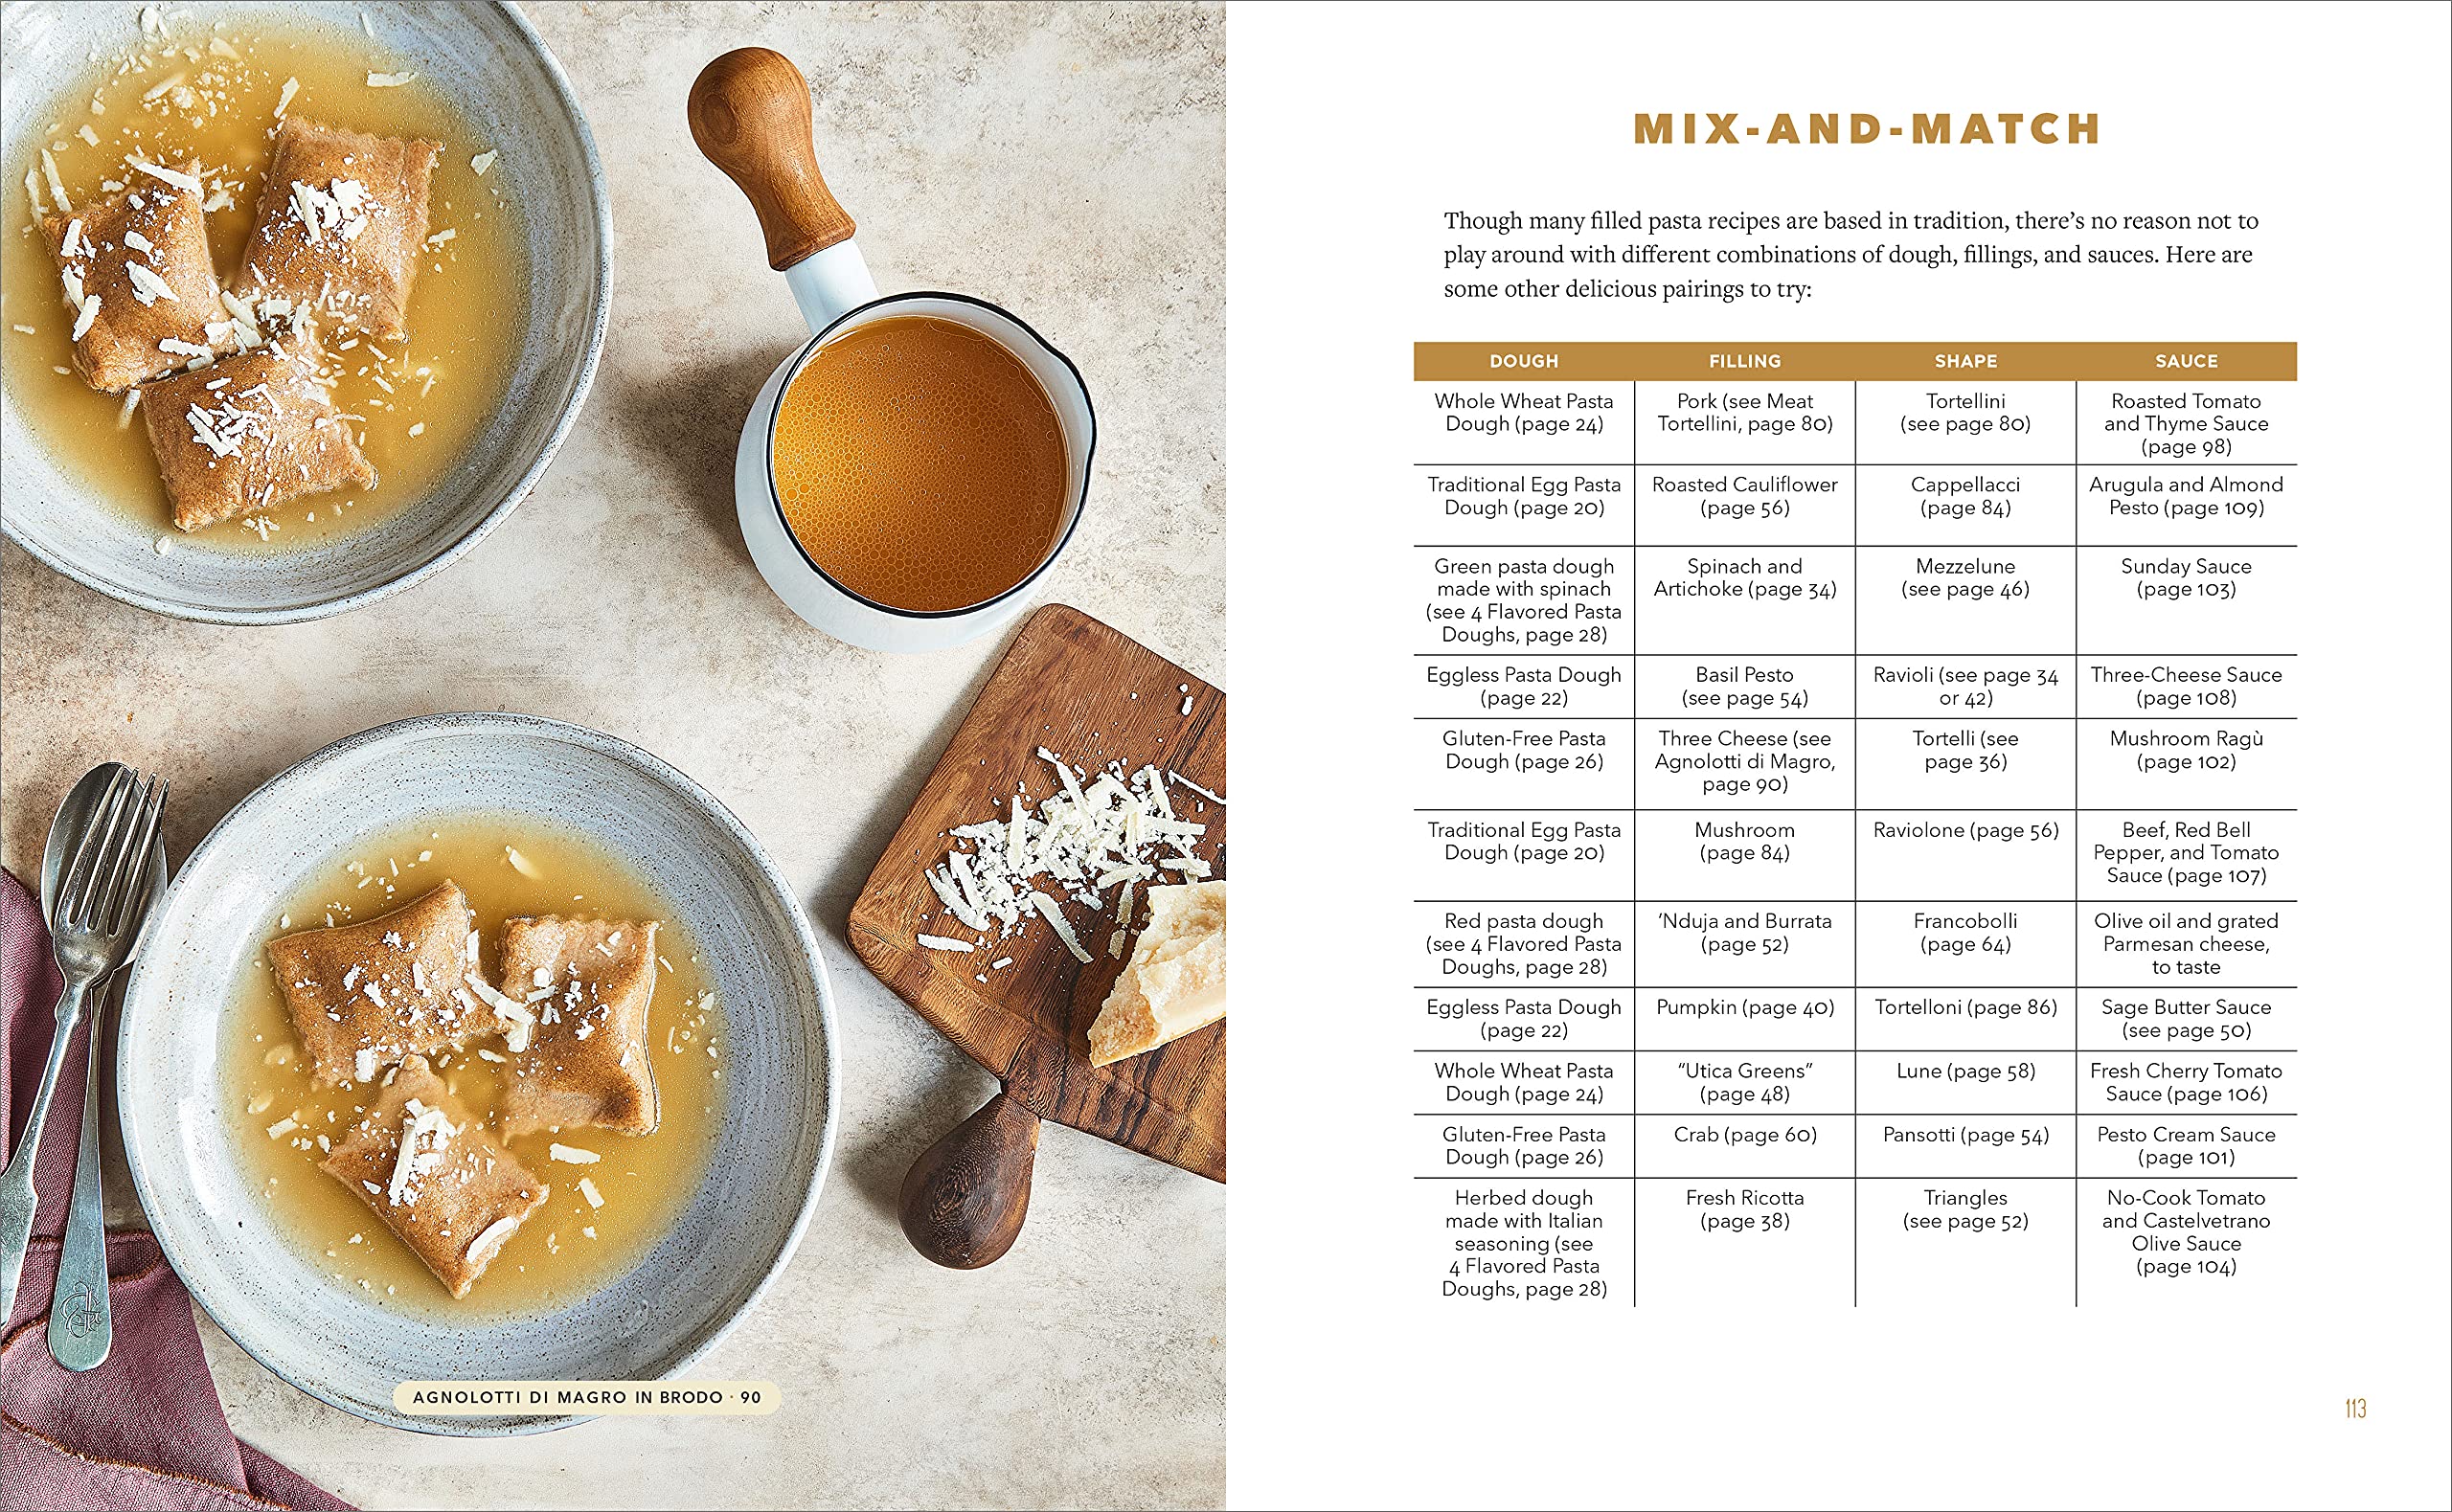 Homemade Ravioli Made Simple: 50 Mix-and-Match Recipes for the Best Filled Pastas (Carmella Alvaro)